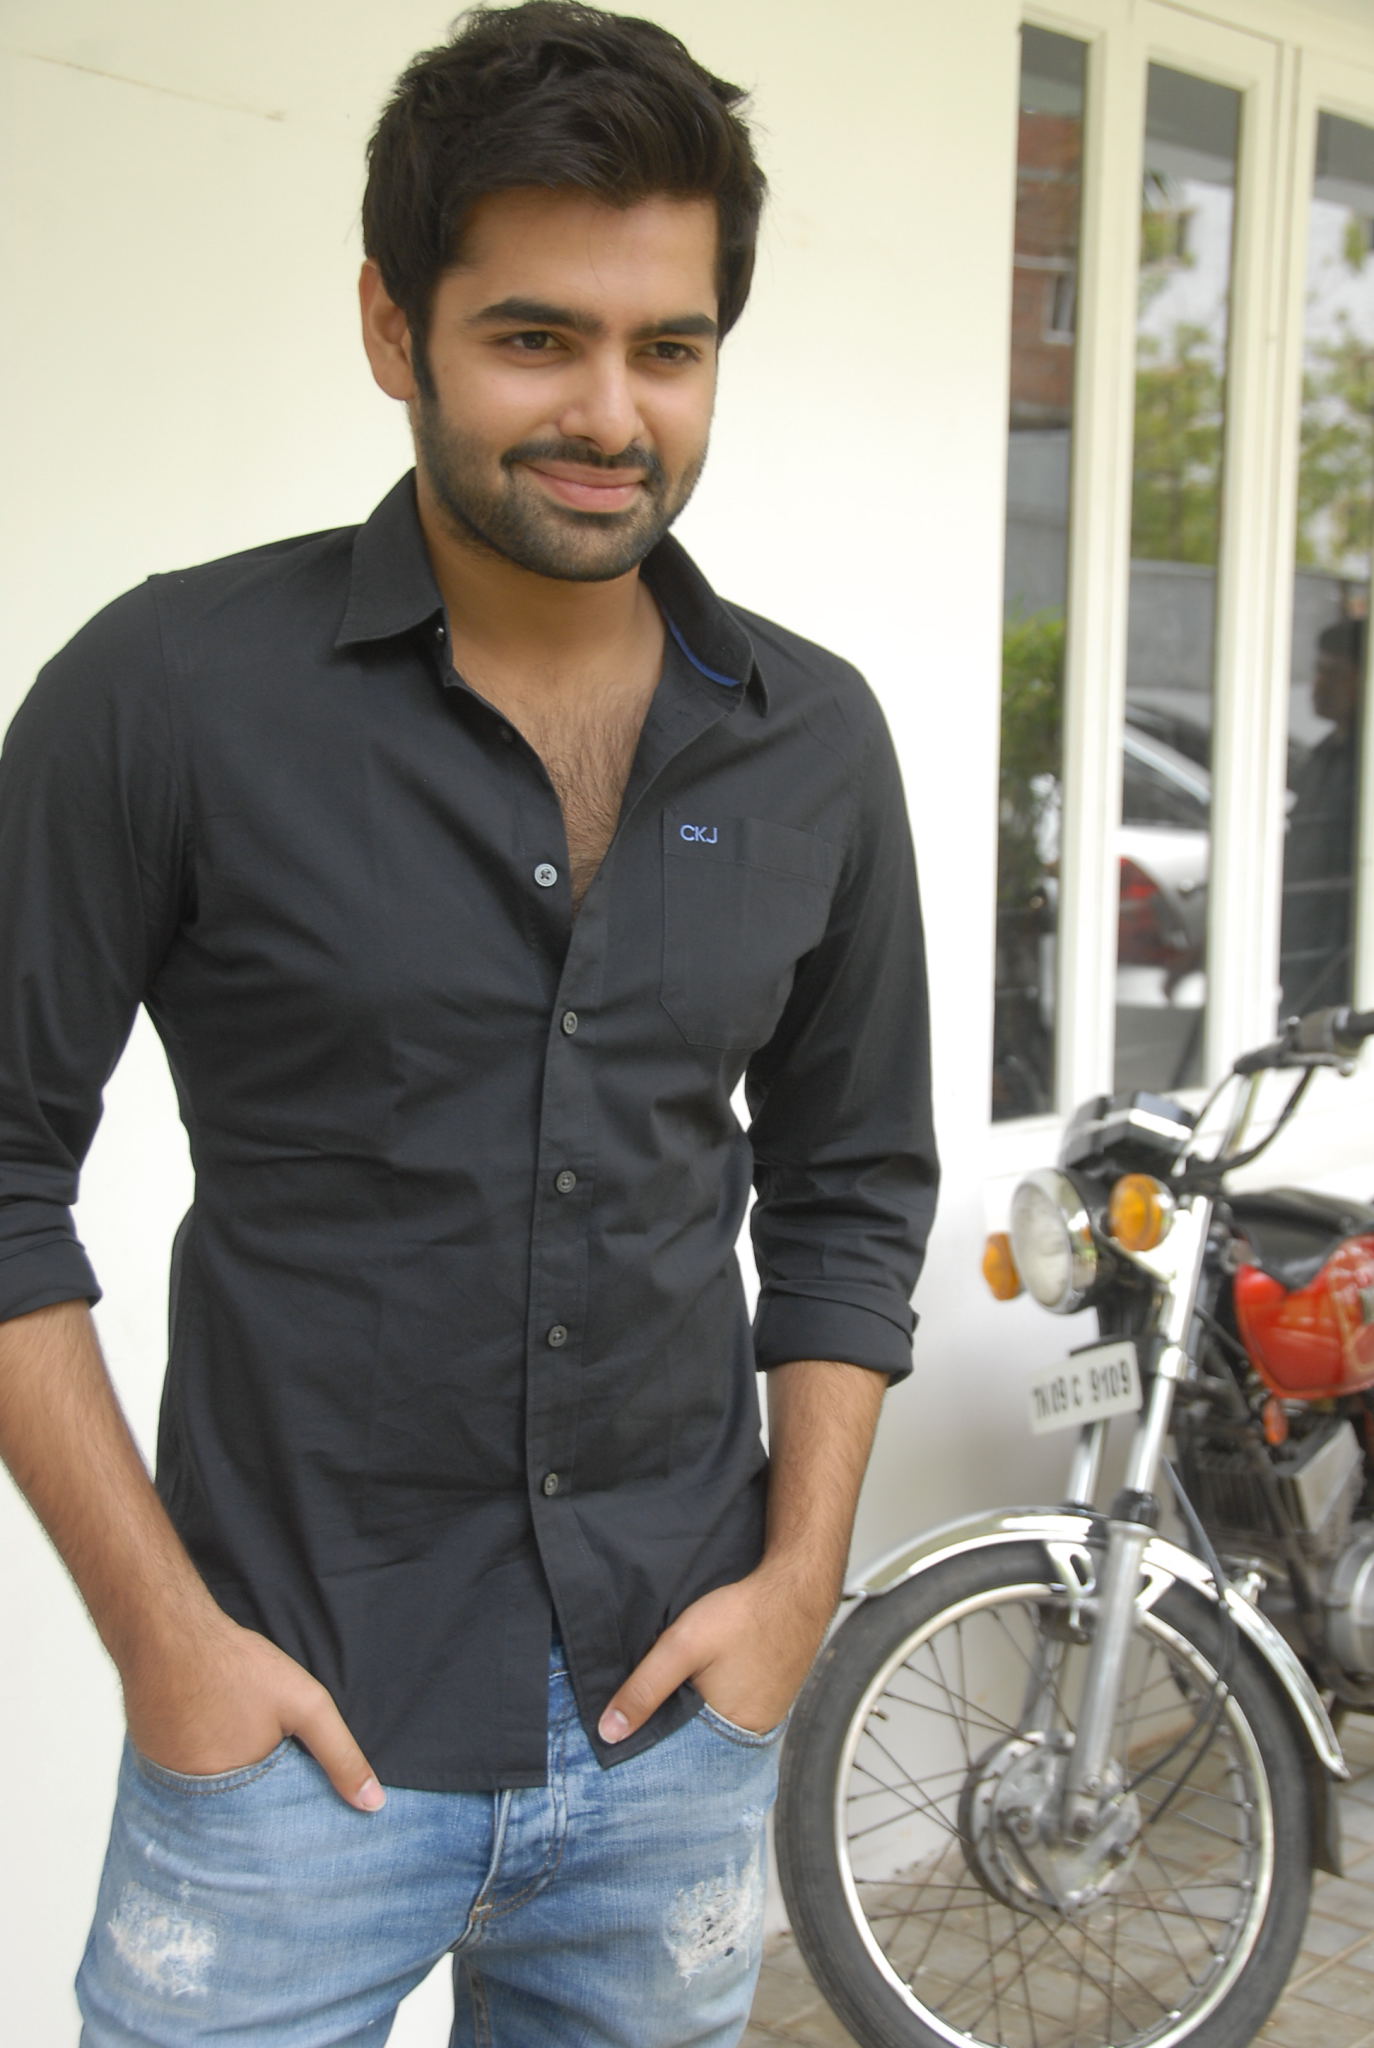 Ram Latest Pictures Gallery | Picture 54136